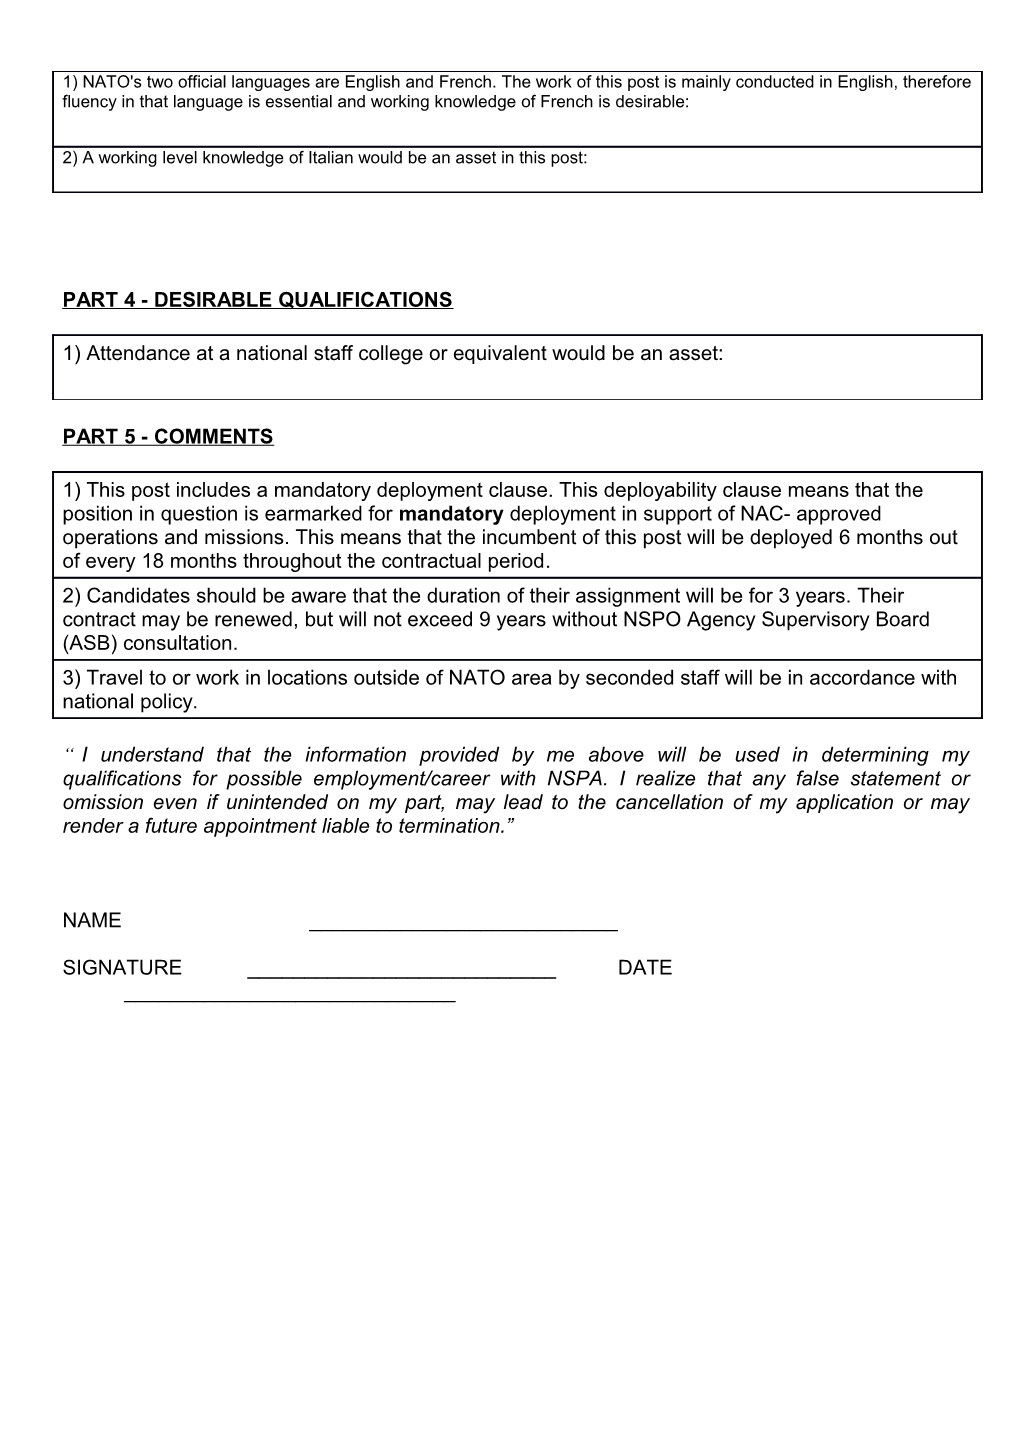 Post Requirements Form s3